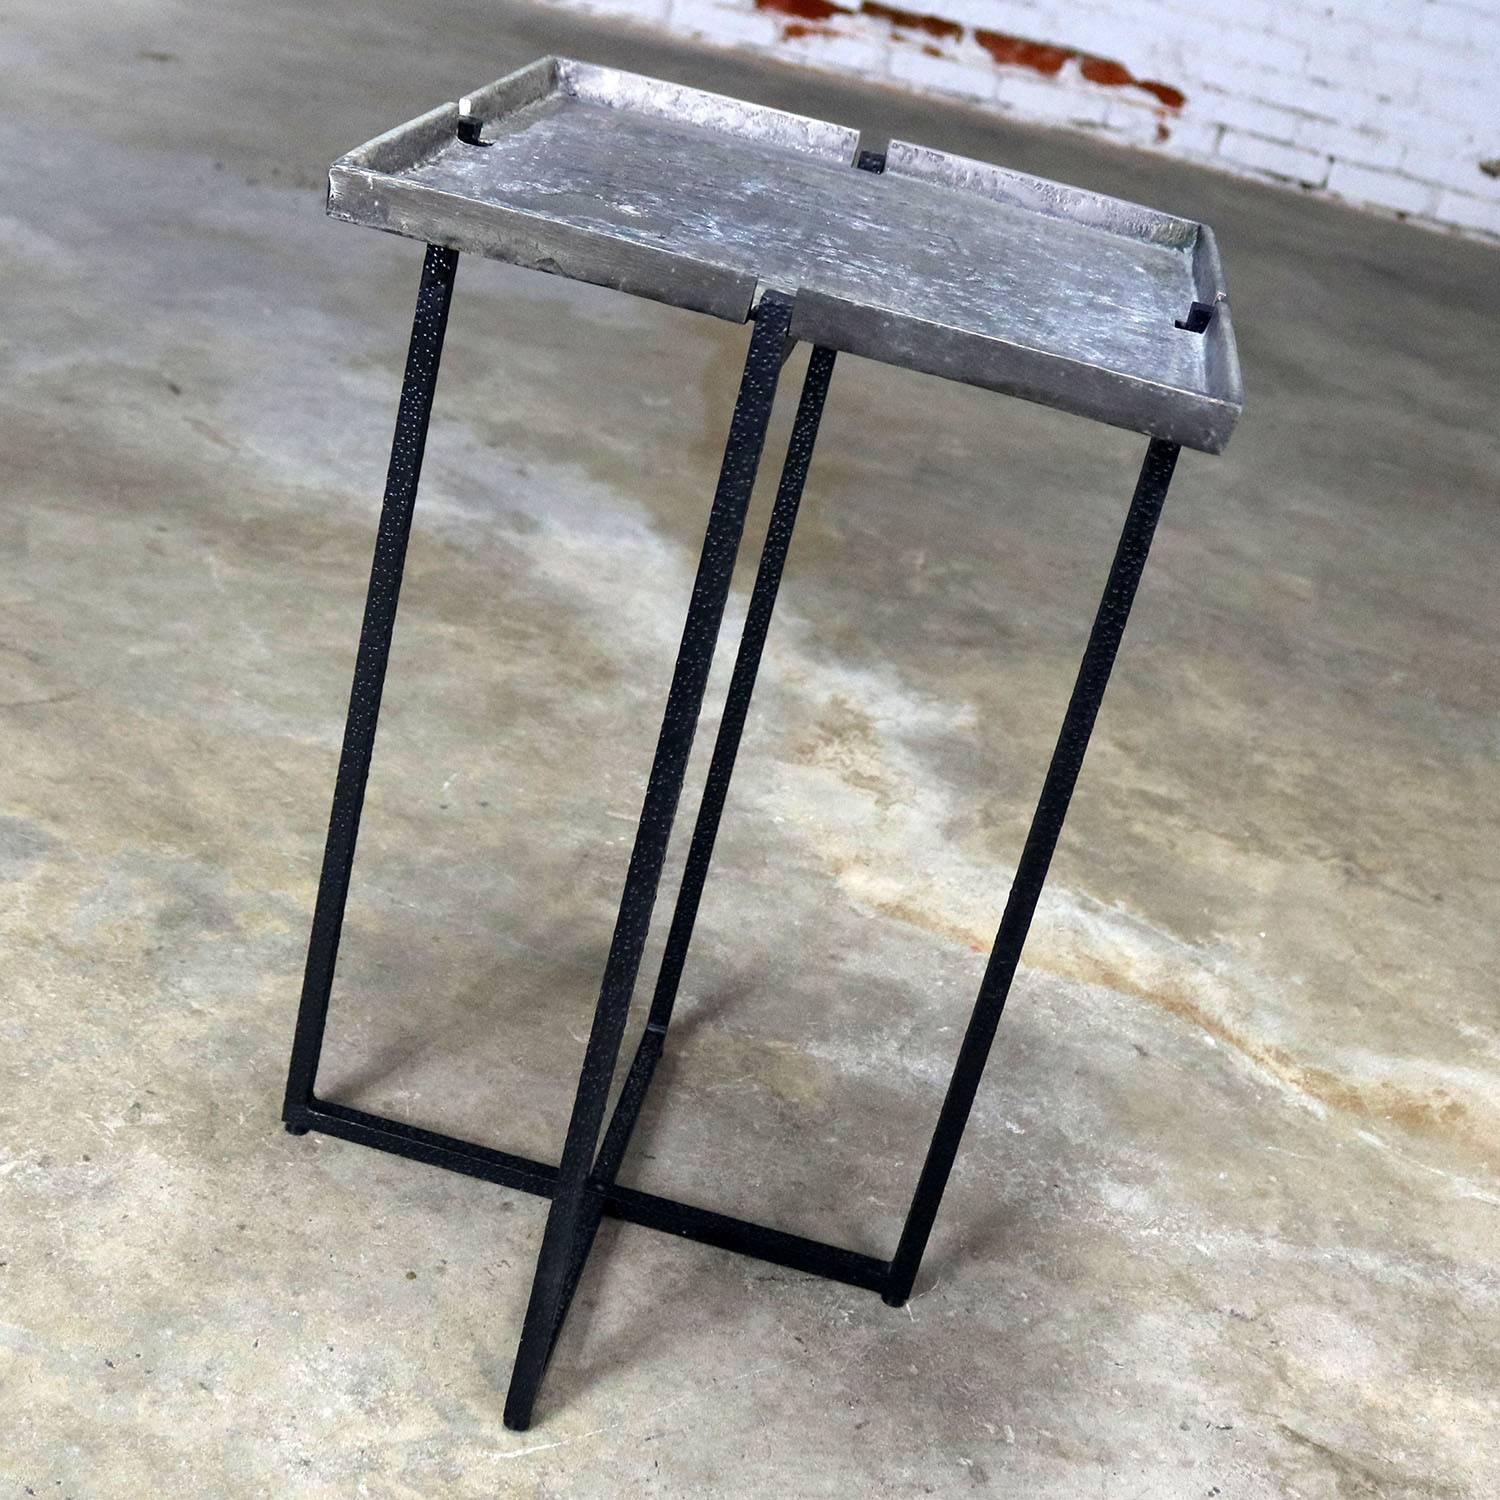 Wonderful small square side table by Michael Aram. Black iron base and removable silvered bronze top. In fabulous condition, circa 21st century.

Petite go anywhere accent table by 21st century contemporary artist Michael Aram. This clever and